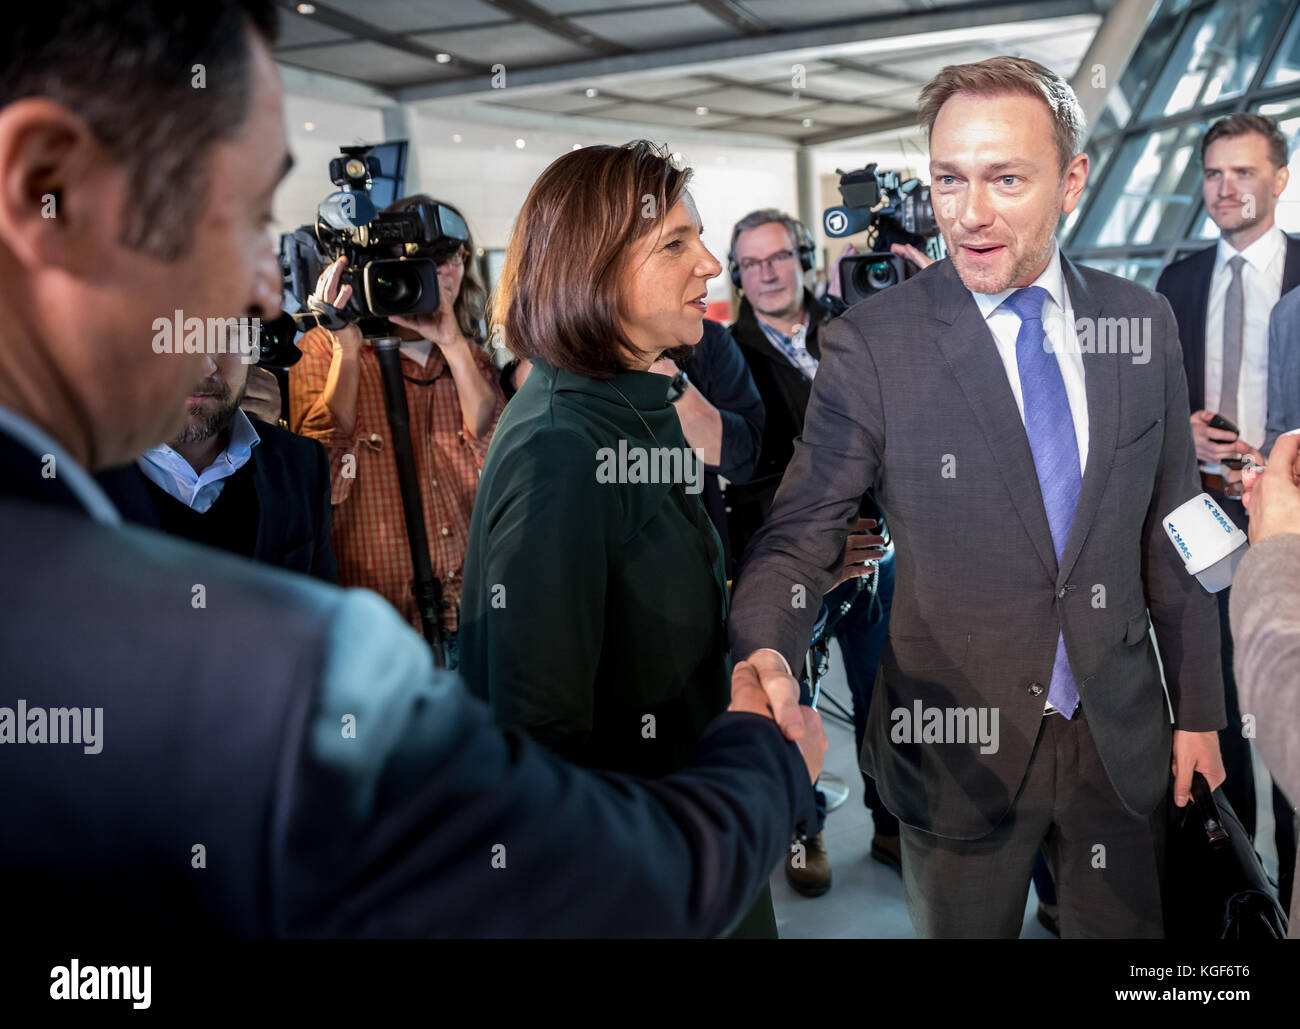 Berlin, Germany. 07th Nov, 2017. Christian Lindner, the FDP's federal chairman (R) greeting Cem Ozdemir, federal chairman of Alliance 90/The Greens (L), and Katrin Goring-Eckardt, chairwoman of the Greens' parliamentary fractiion, ahead of a further round of the ongoing exploratory talks by the CDU, CSU, FDP and Alliance 90/The Greens in the Bundestag (Federal Parliament) in Berlin, Germany, 07 November 2017. Credit: Michael Kappeler/dpa/Alamy Live News Stock Photo